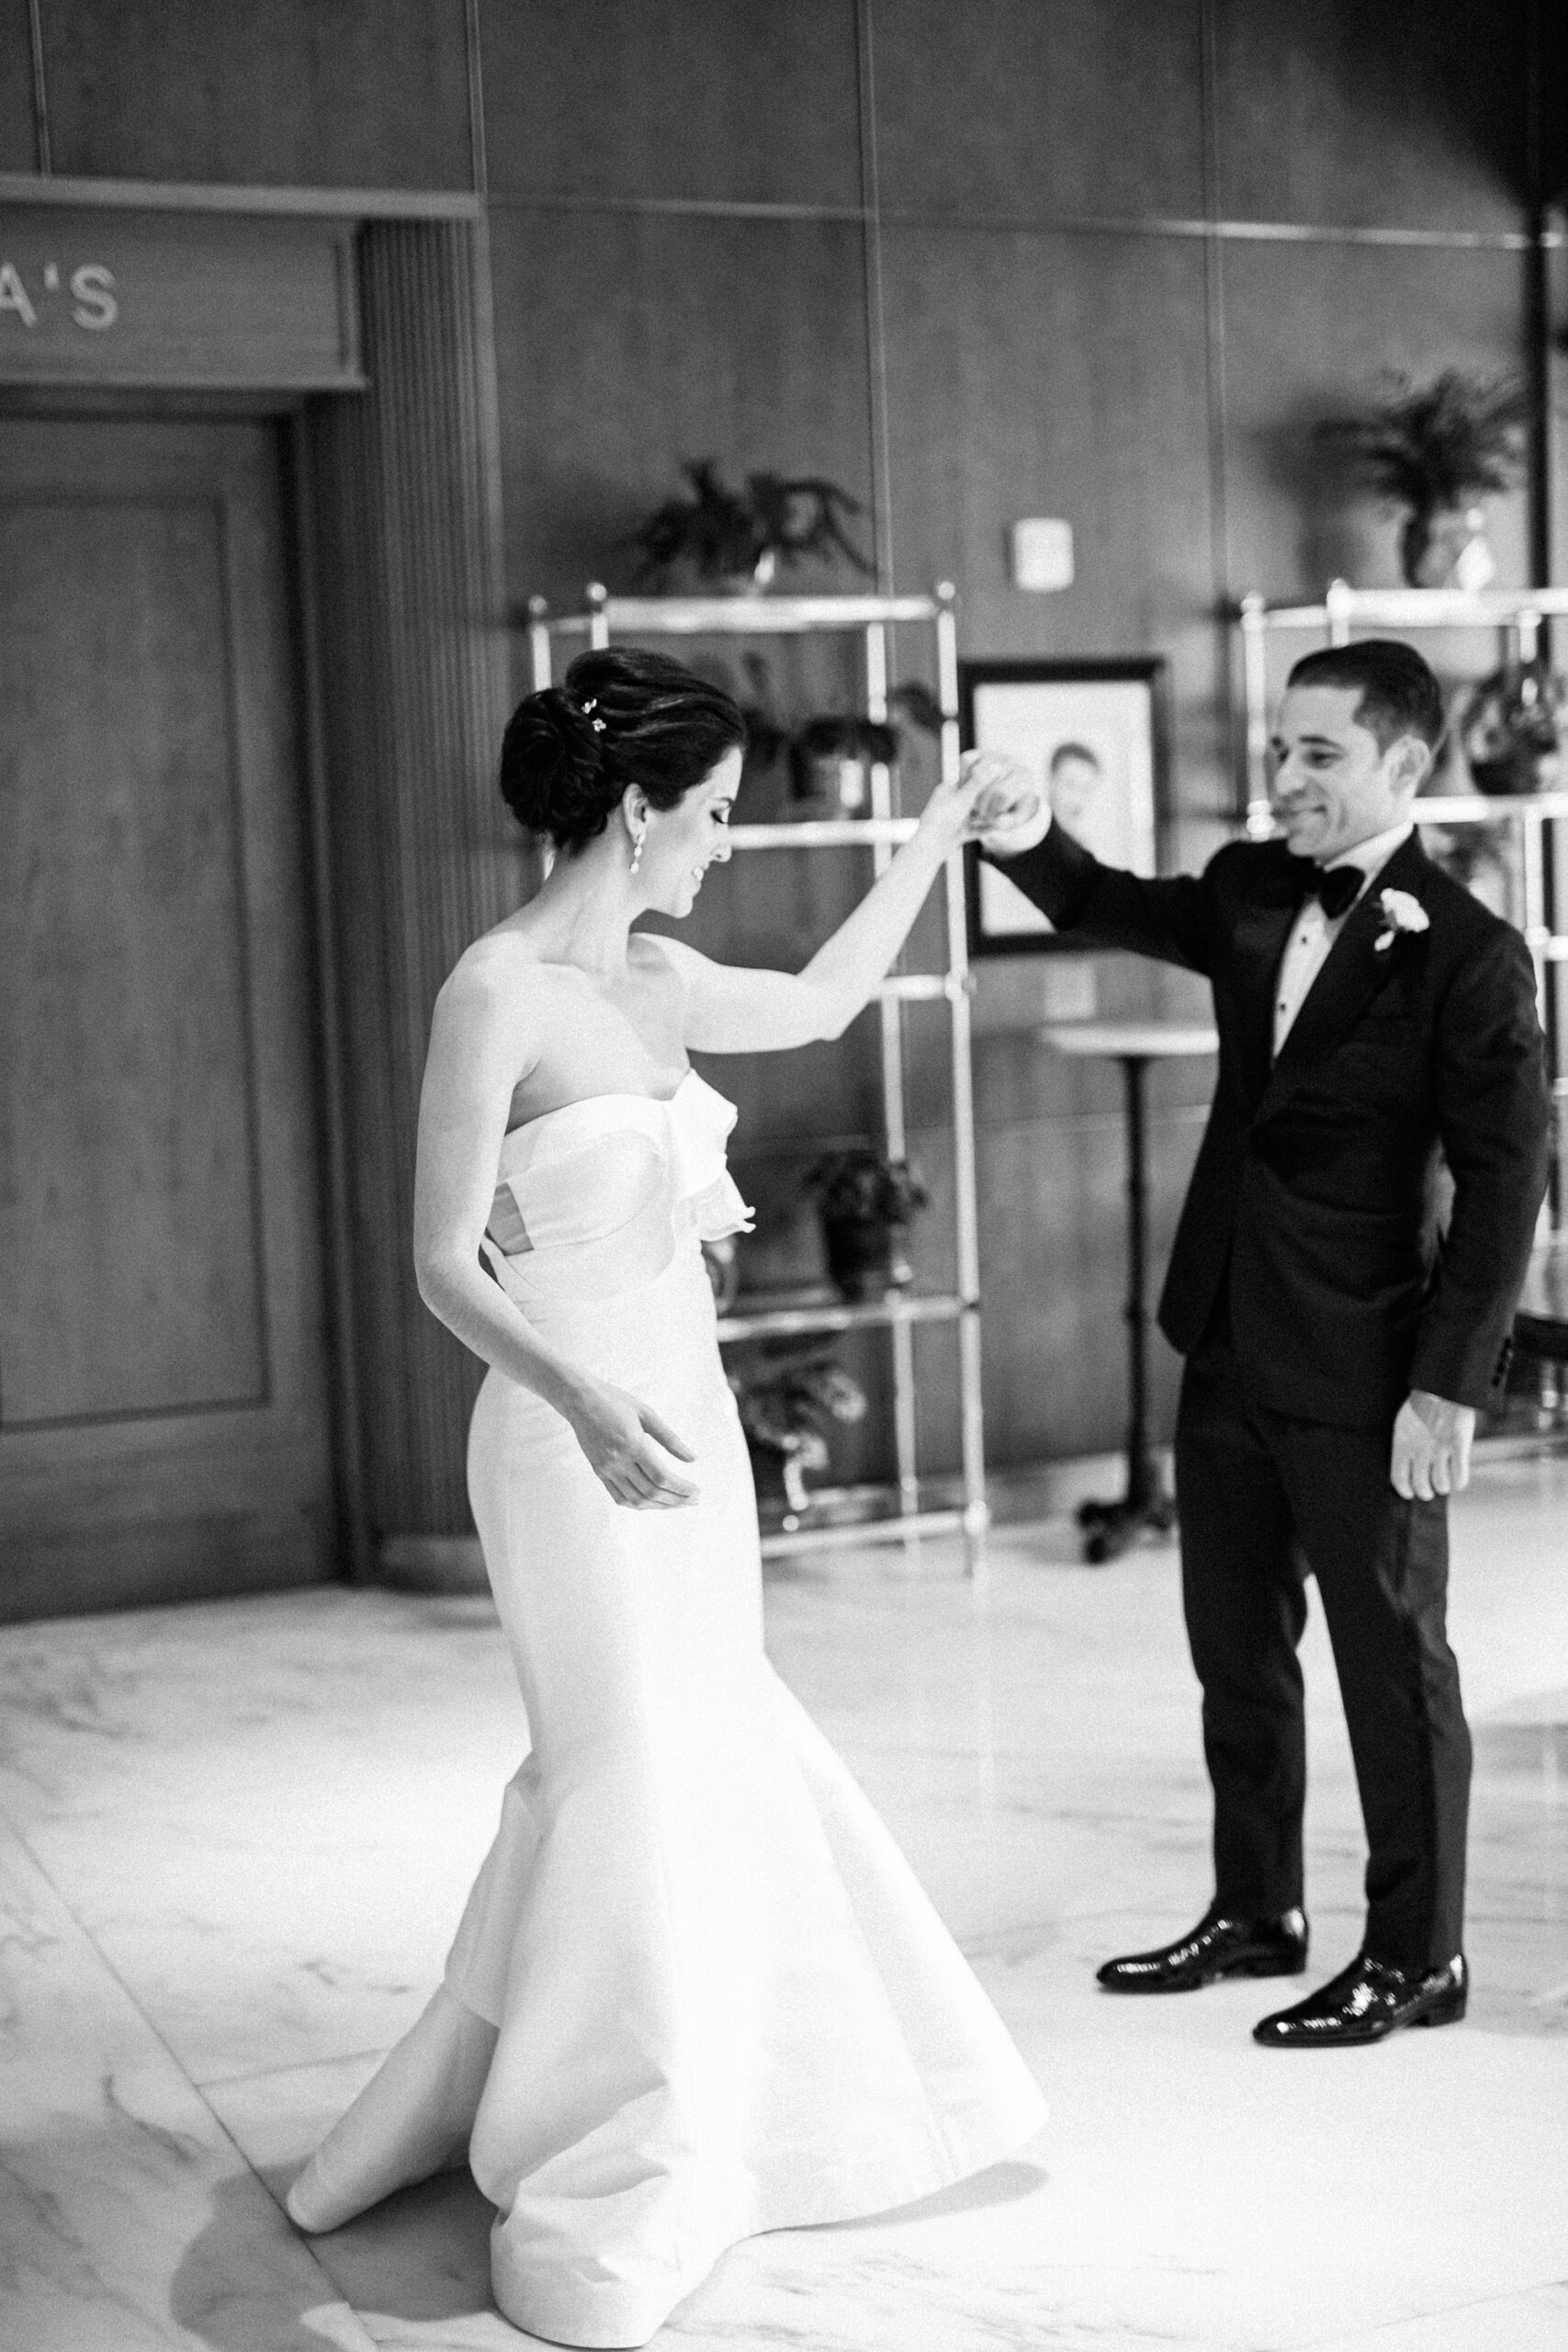 Candid moment of a well dressed groom twirling his fashionable bride in the lobby of the Dewberry Hotel in Charleston